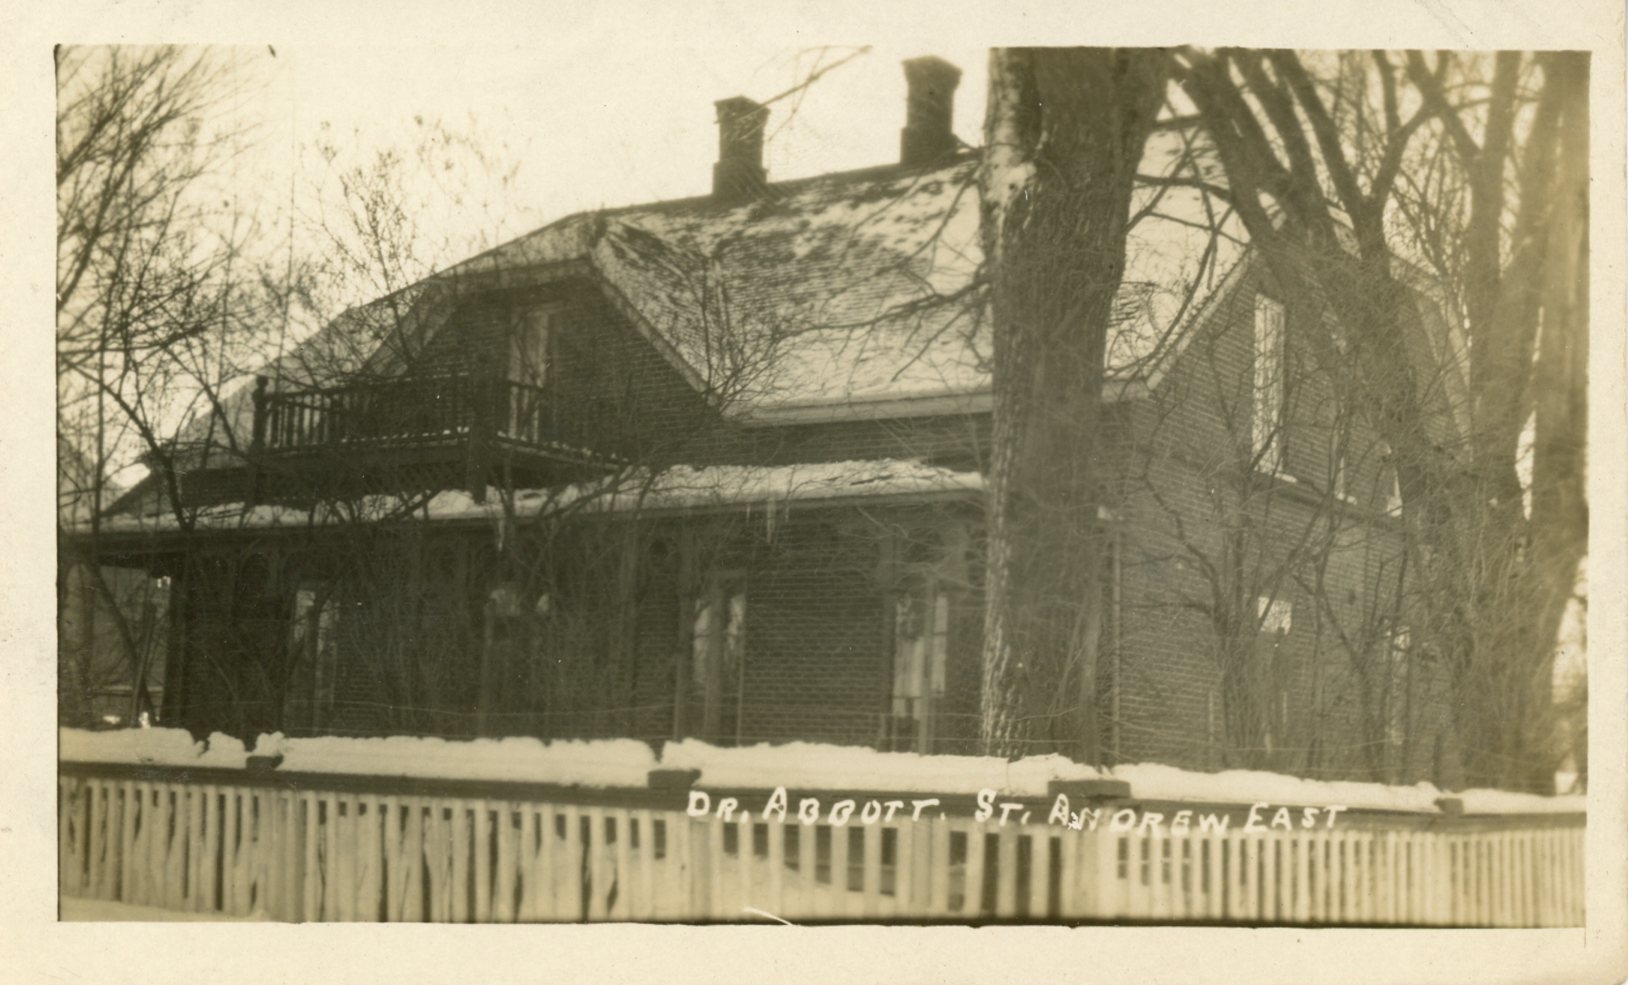 Photograph of Elmbank, Maude Abbott’s home, in winter, sepia. It is a two-storey brick house with a gable roof, two chimneys and a gallery on each floor. There is a white wooden fence in front of the house, which is surrounded by leafless trees.